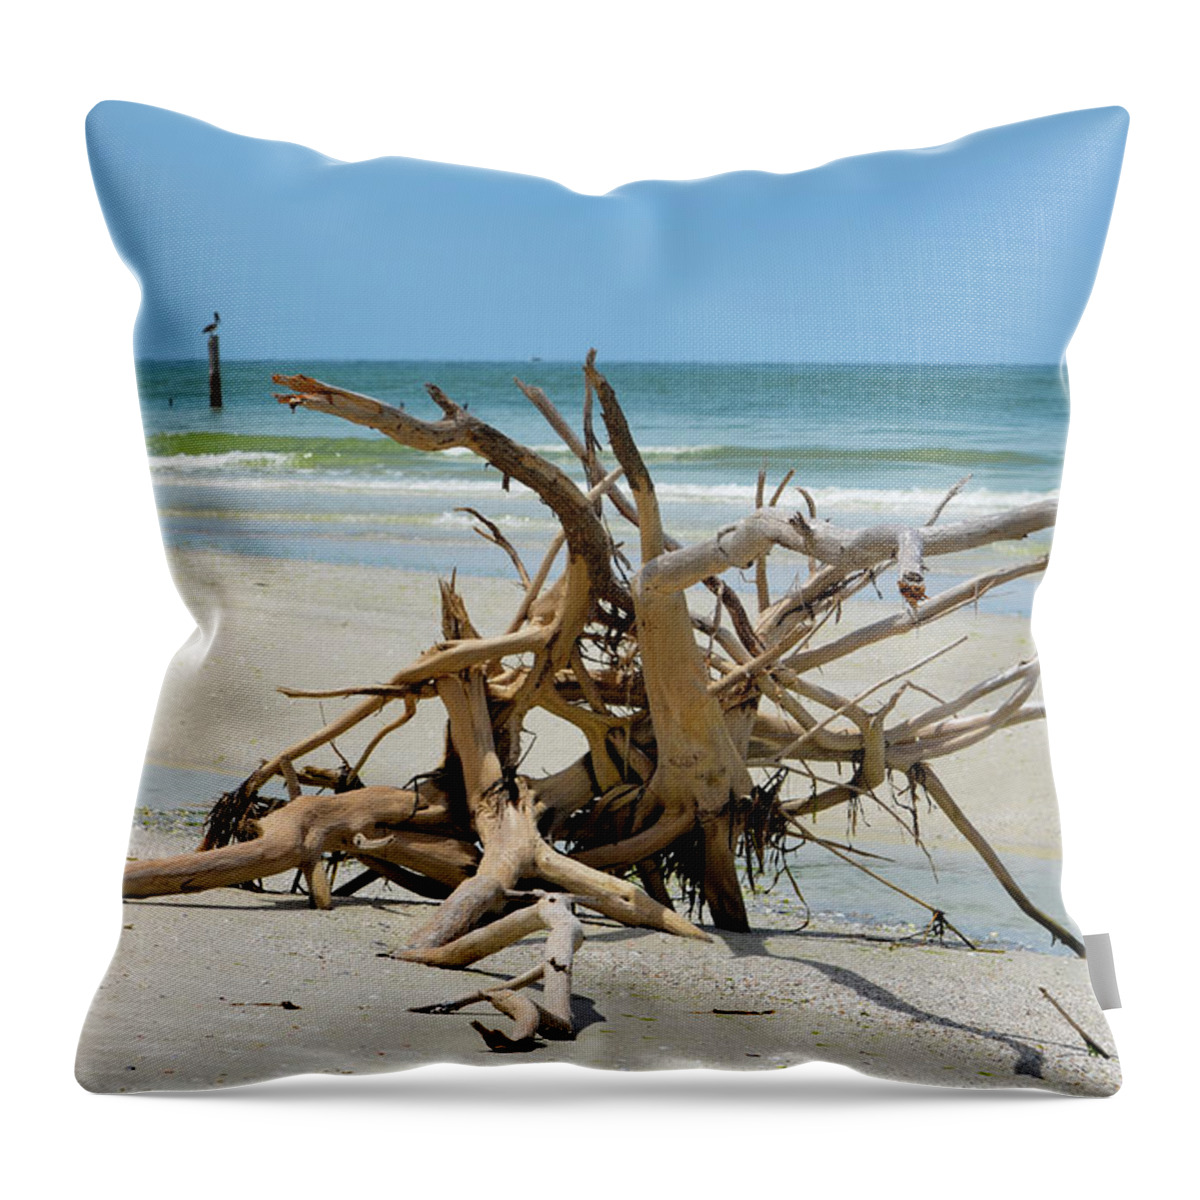 Beach Throw Pillow featuring the photograph Pretzel by Artful Imagery